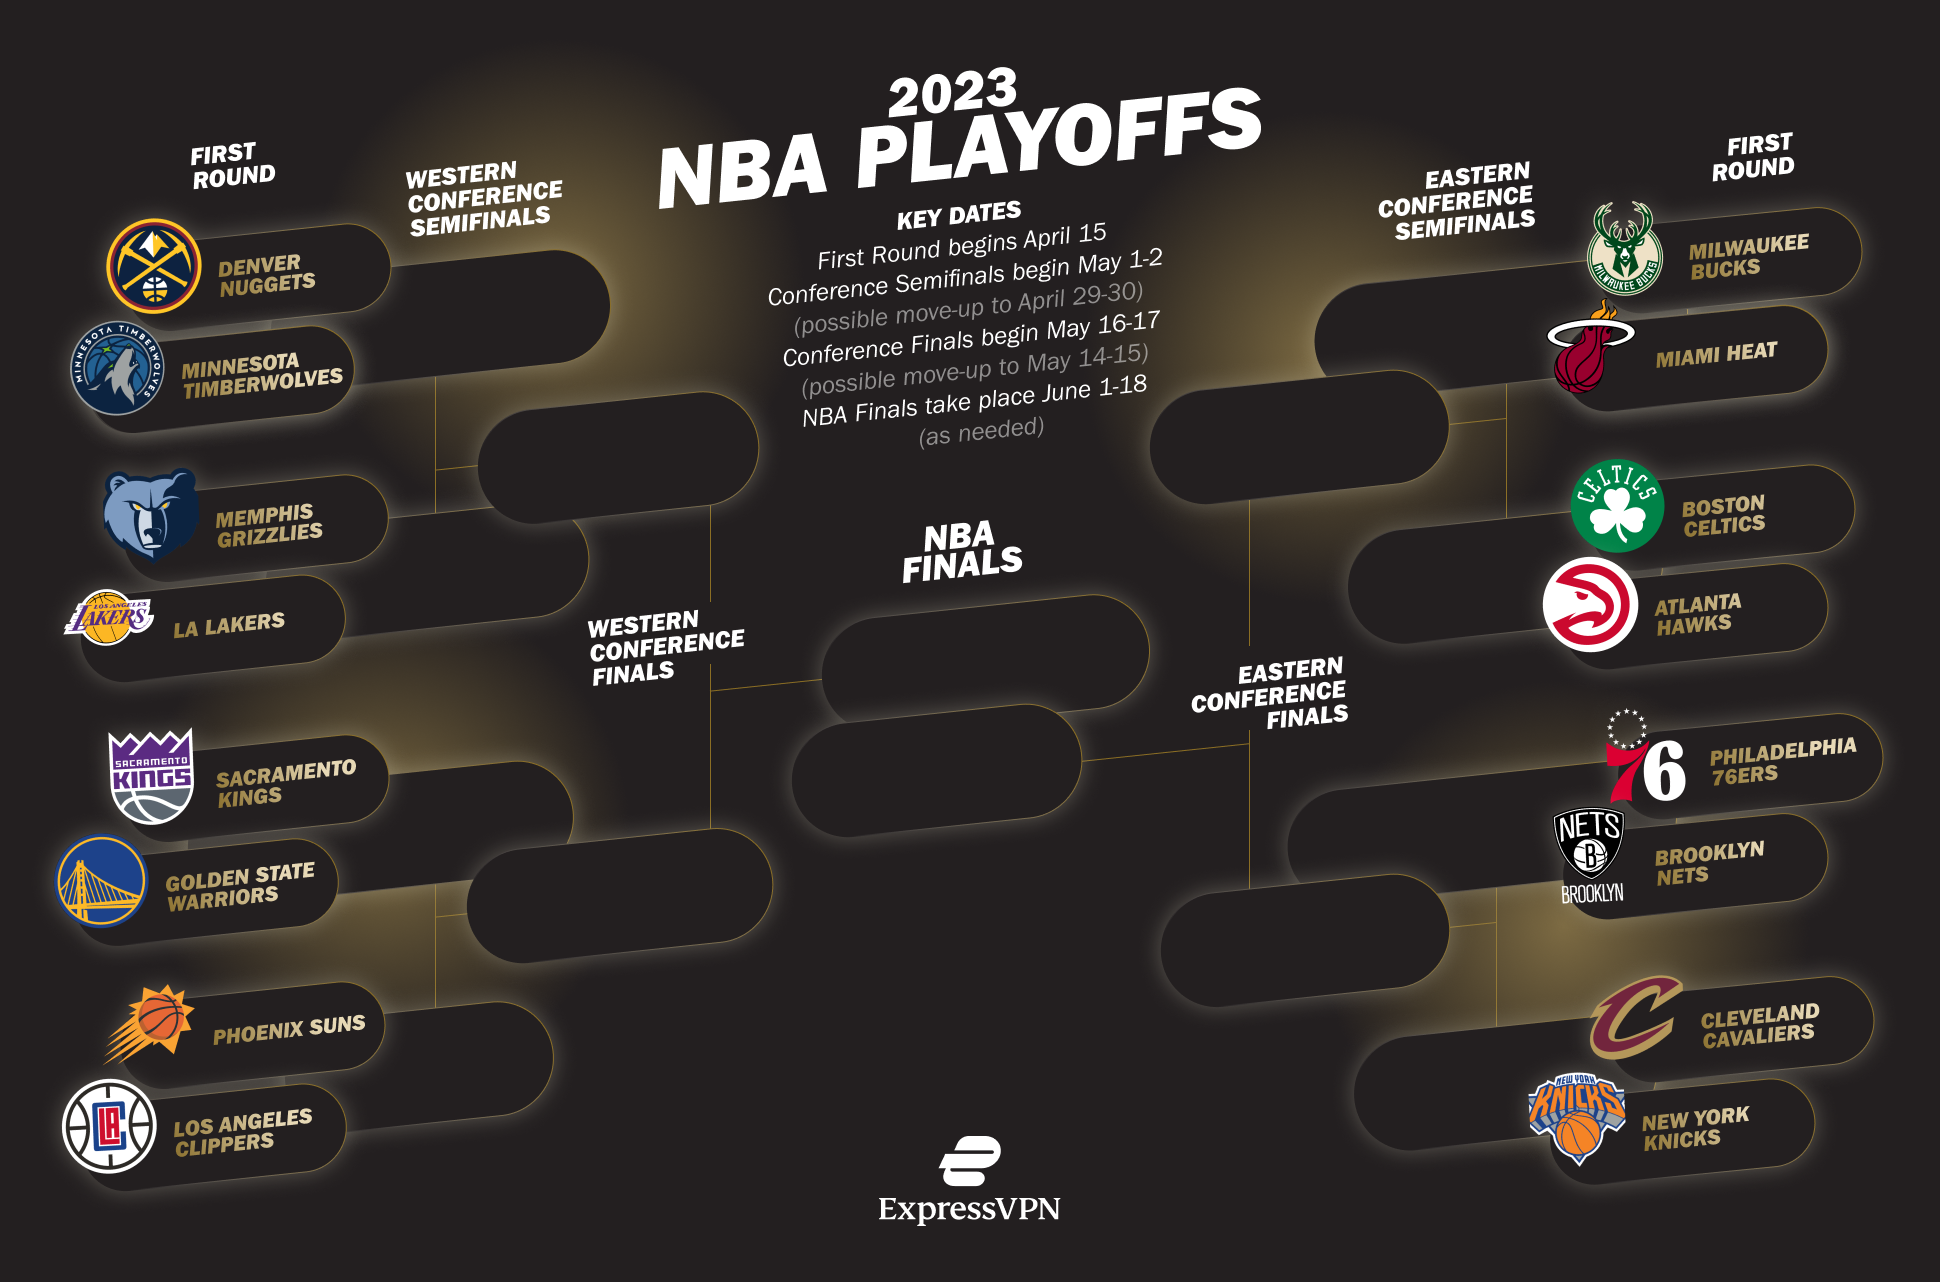 NBA Play-In Tournament, explained: Format, matchups, seeds